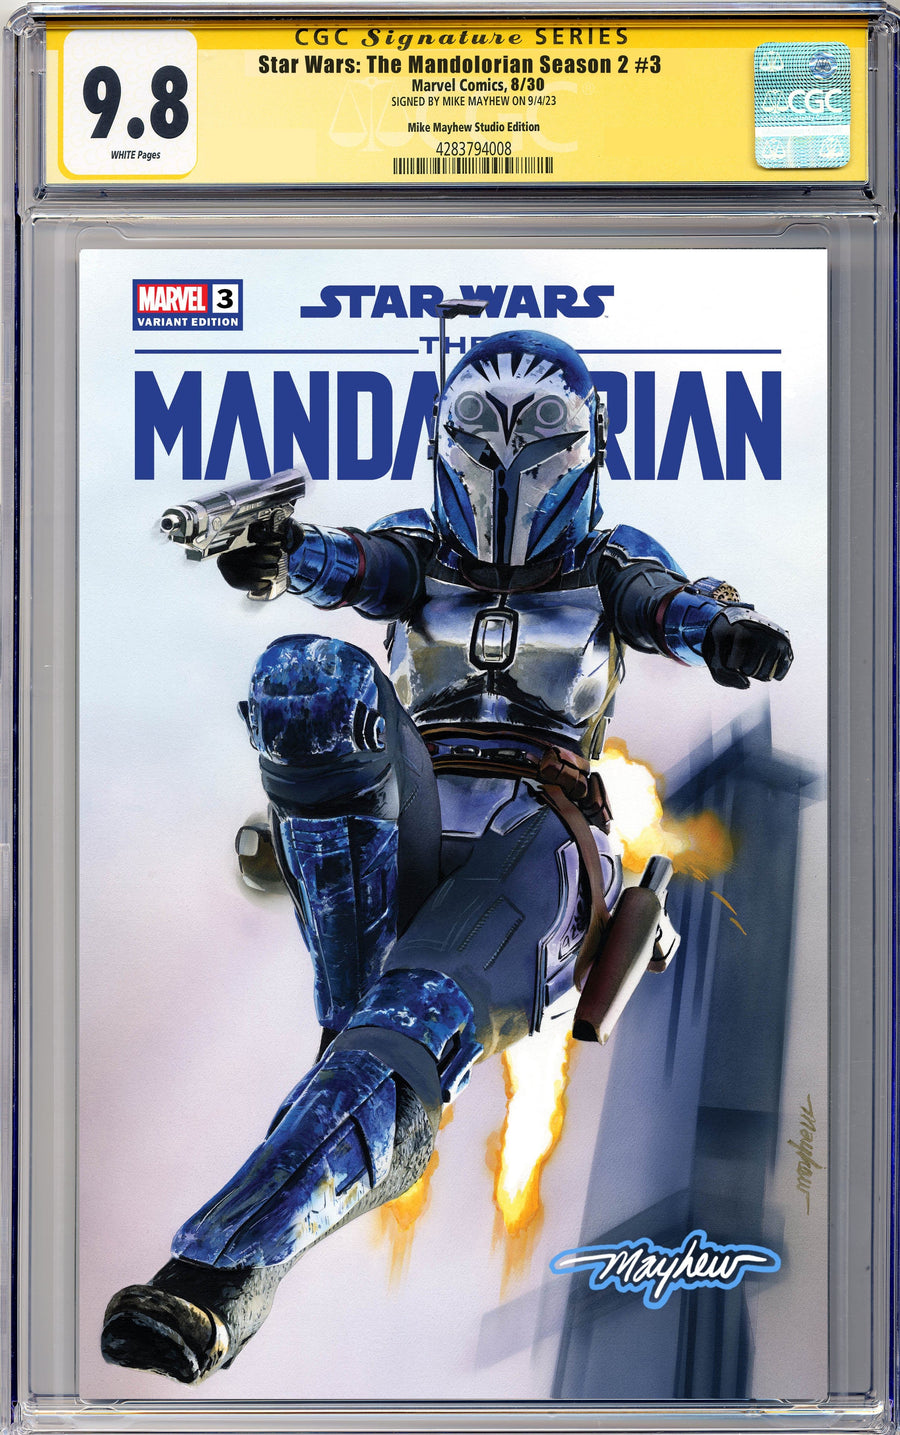 STAR WARS: THE MANDALORIAN SEASON 2 #3 Mike Mayhew Studio Variant Cover A Trade Dress Saber Glow Sig CGC Yellow Label 9.6 and Above Graded Slab